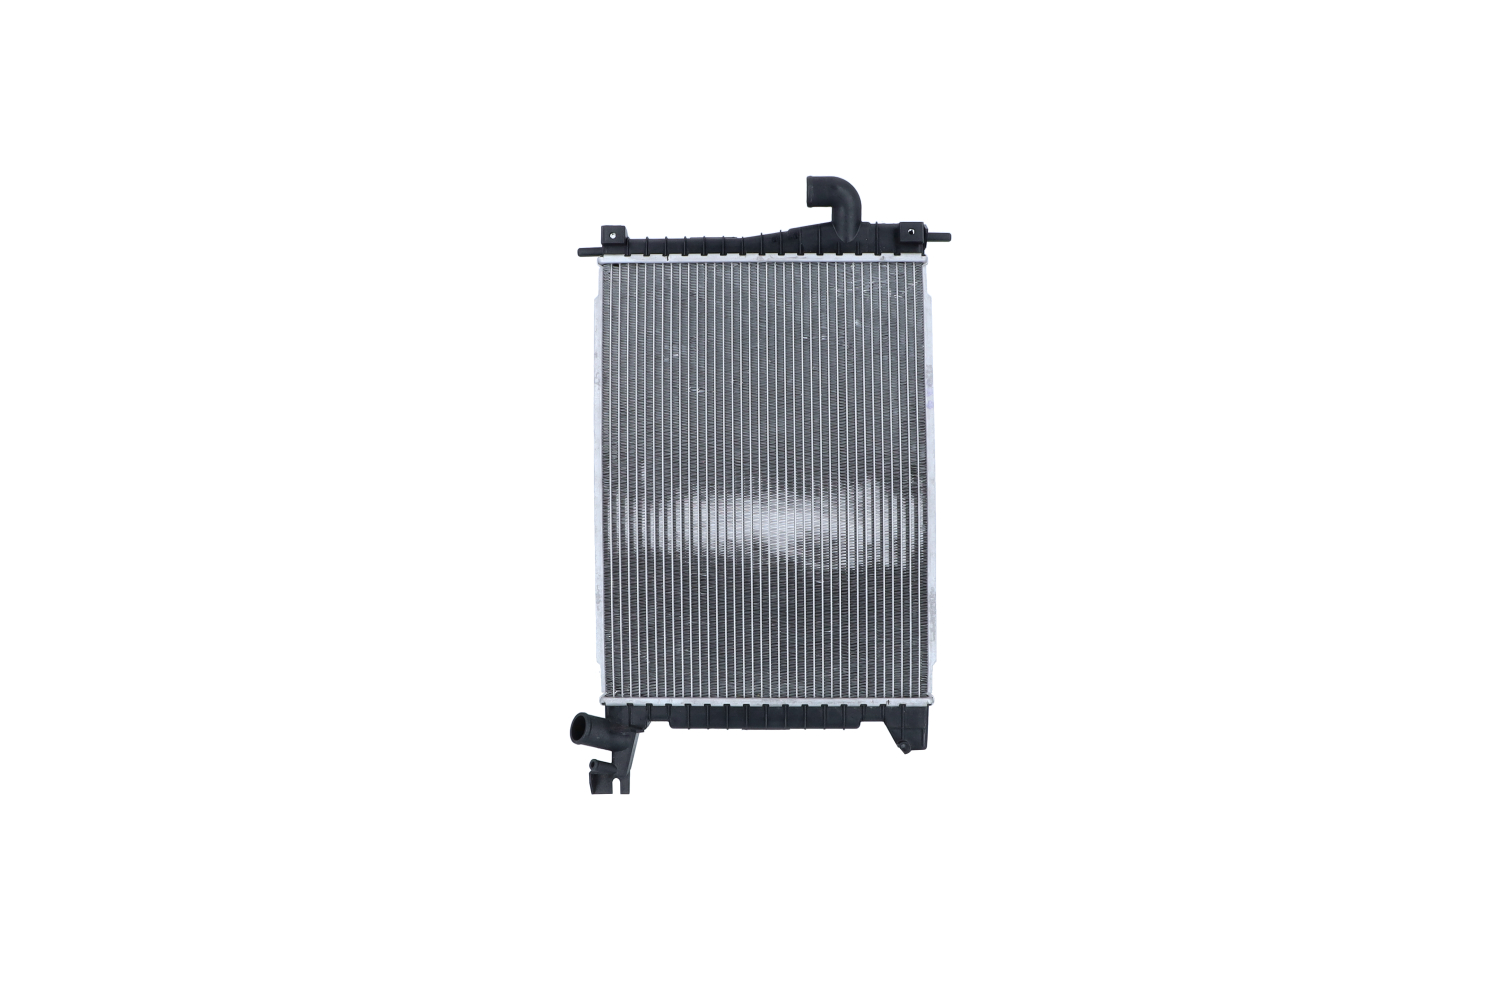 NRF 507527 Engine radiator Aluminium, 496 x 366 x 42 mm, with mounting parts, Brazed cooling fins